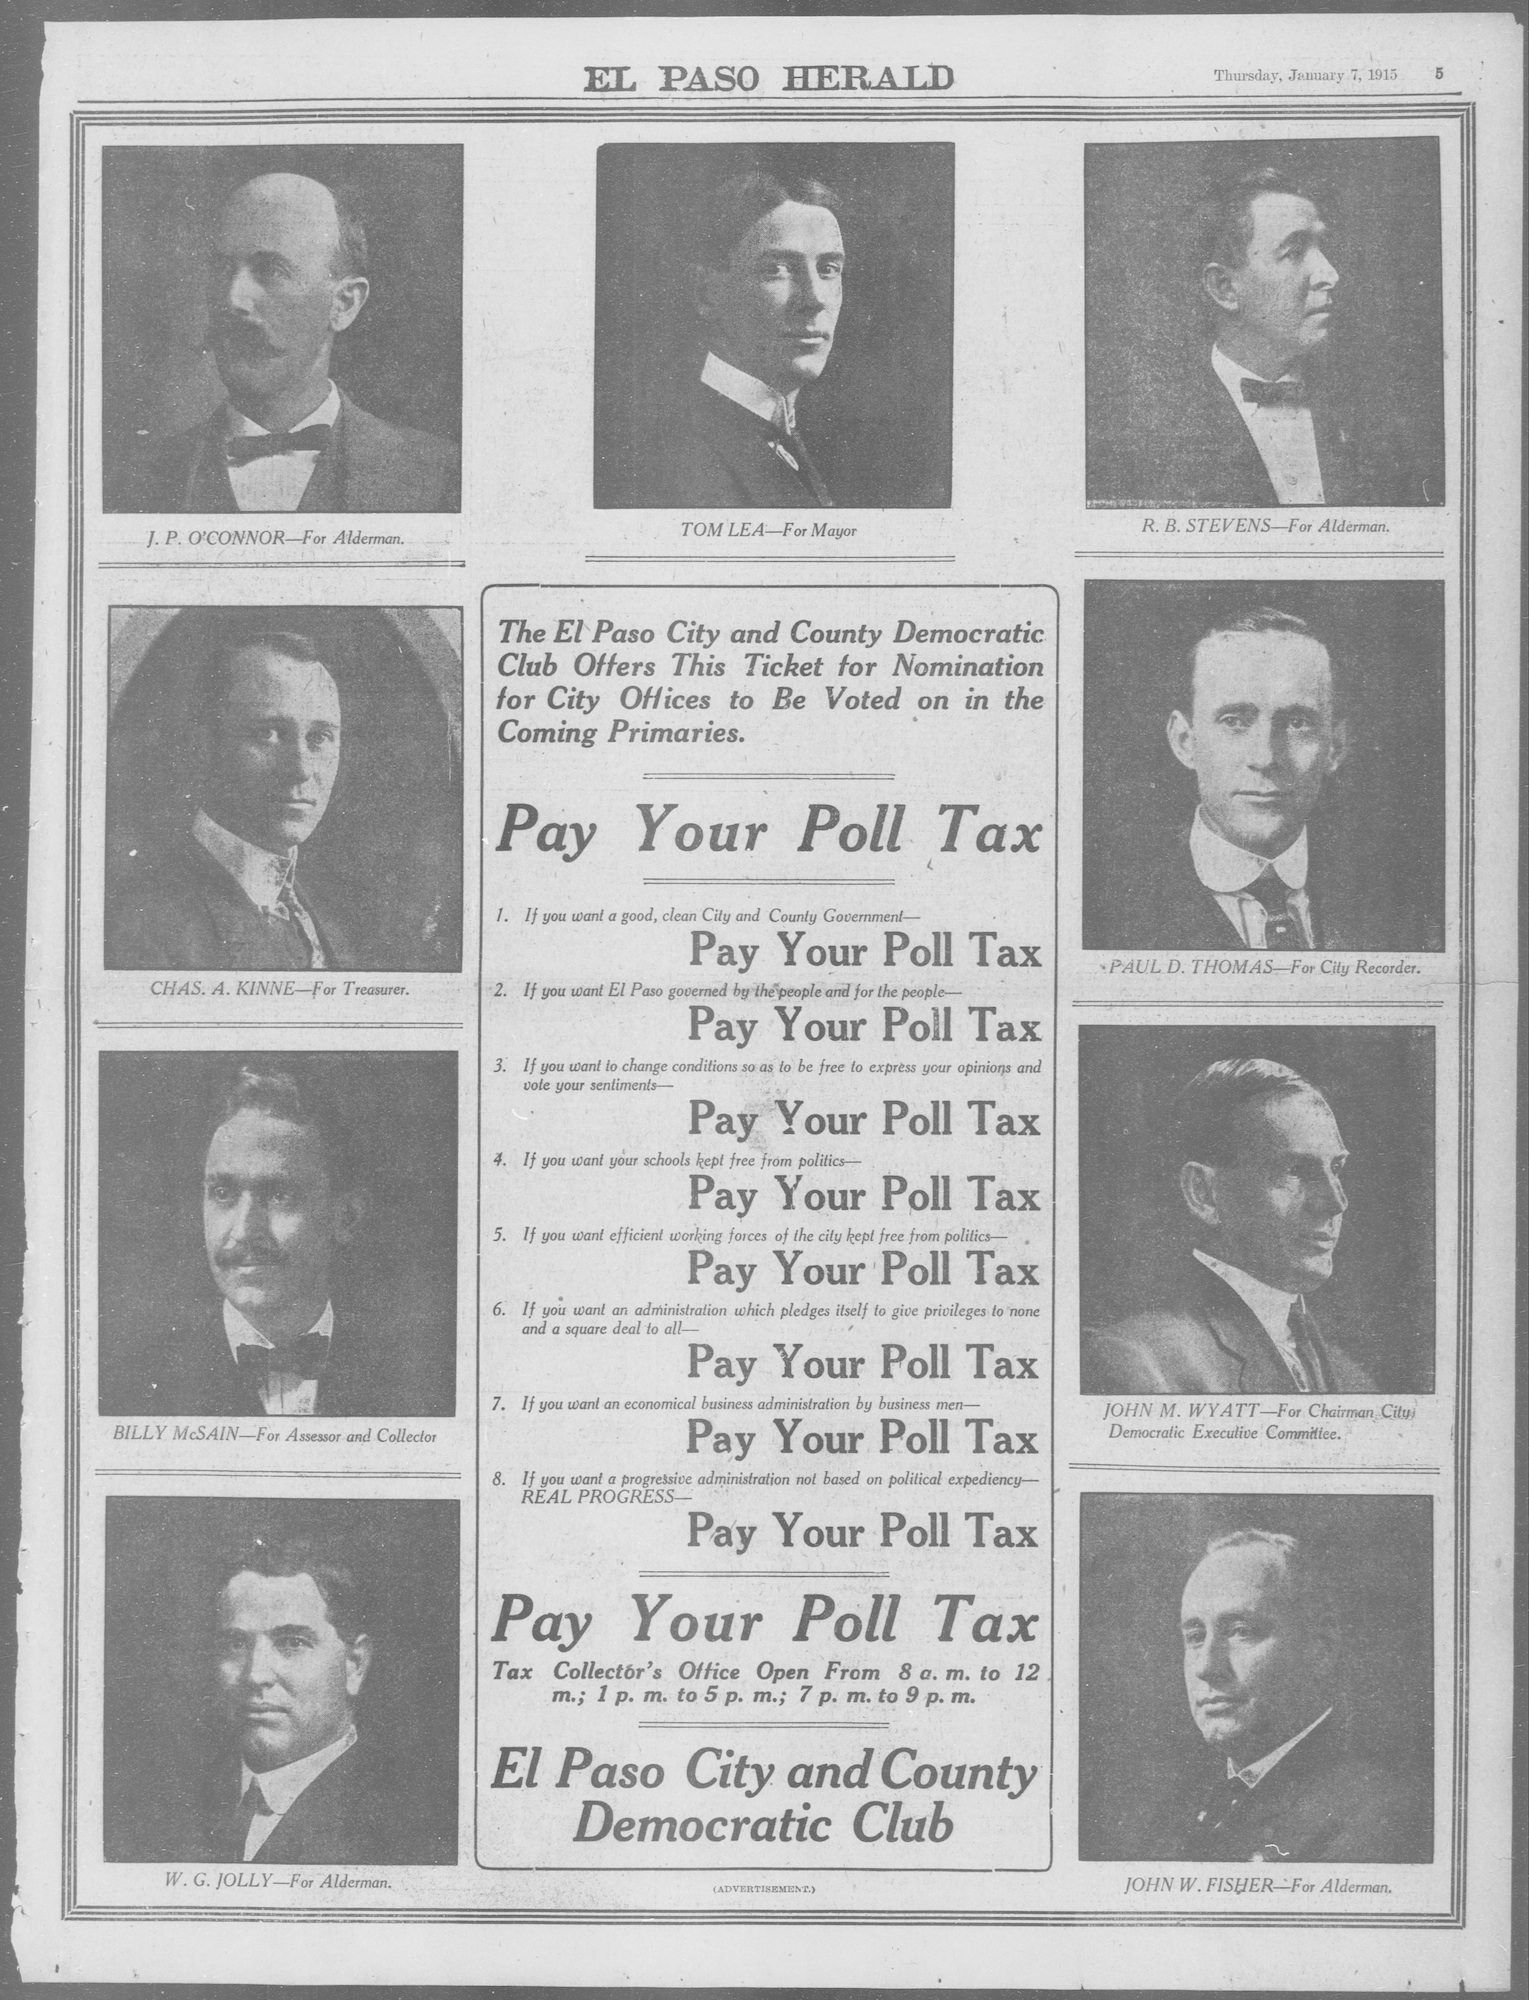 Pay Your Poll Tax